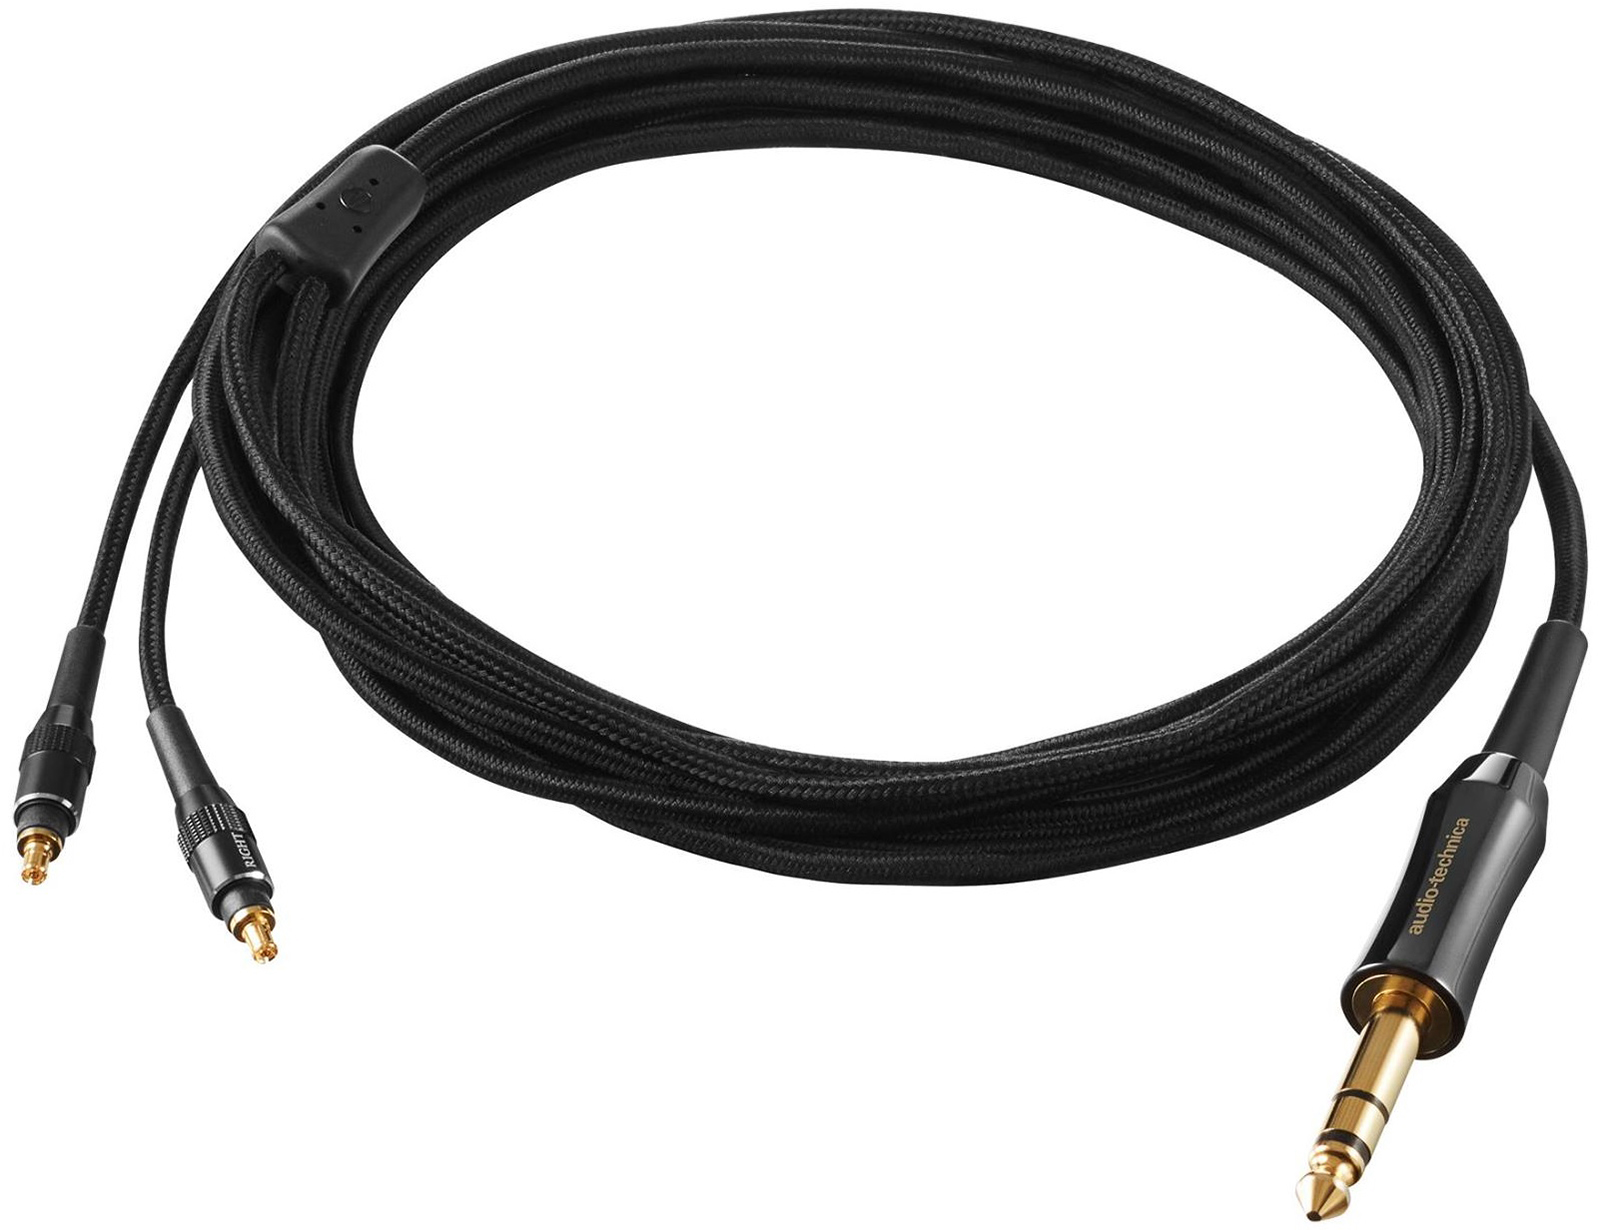 ath-adx5000-cable-1b.jpg